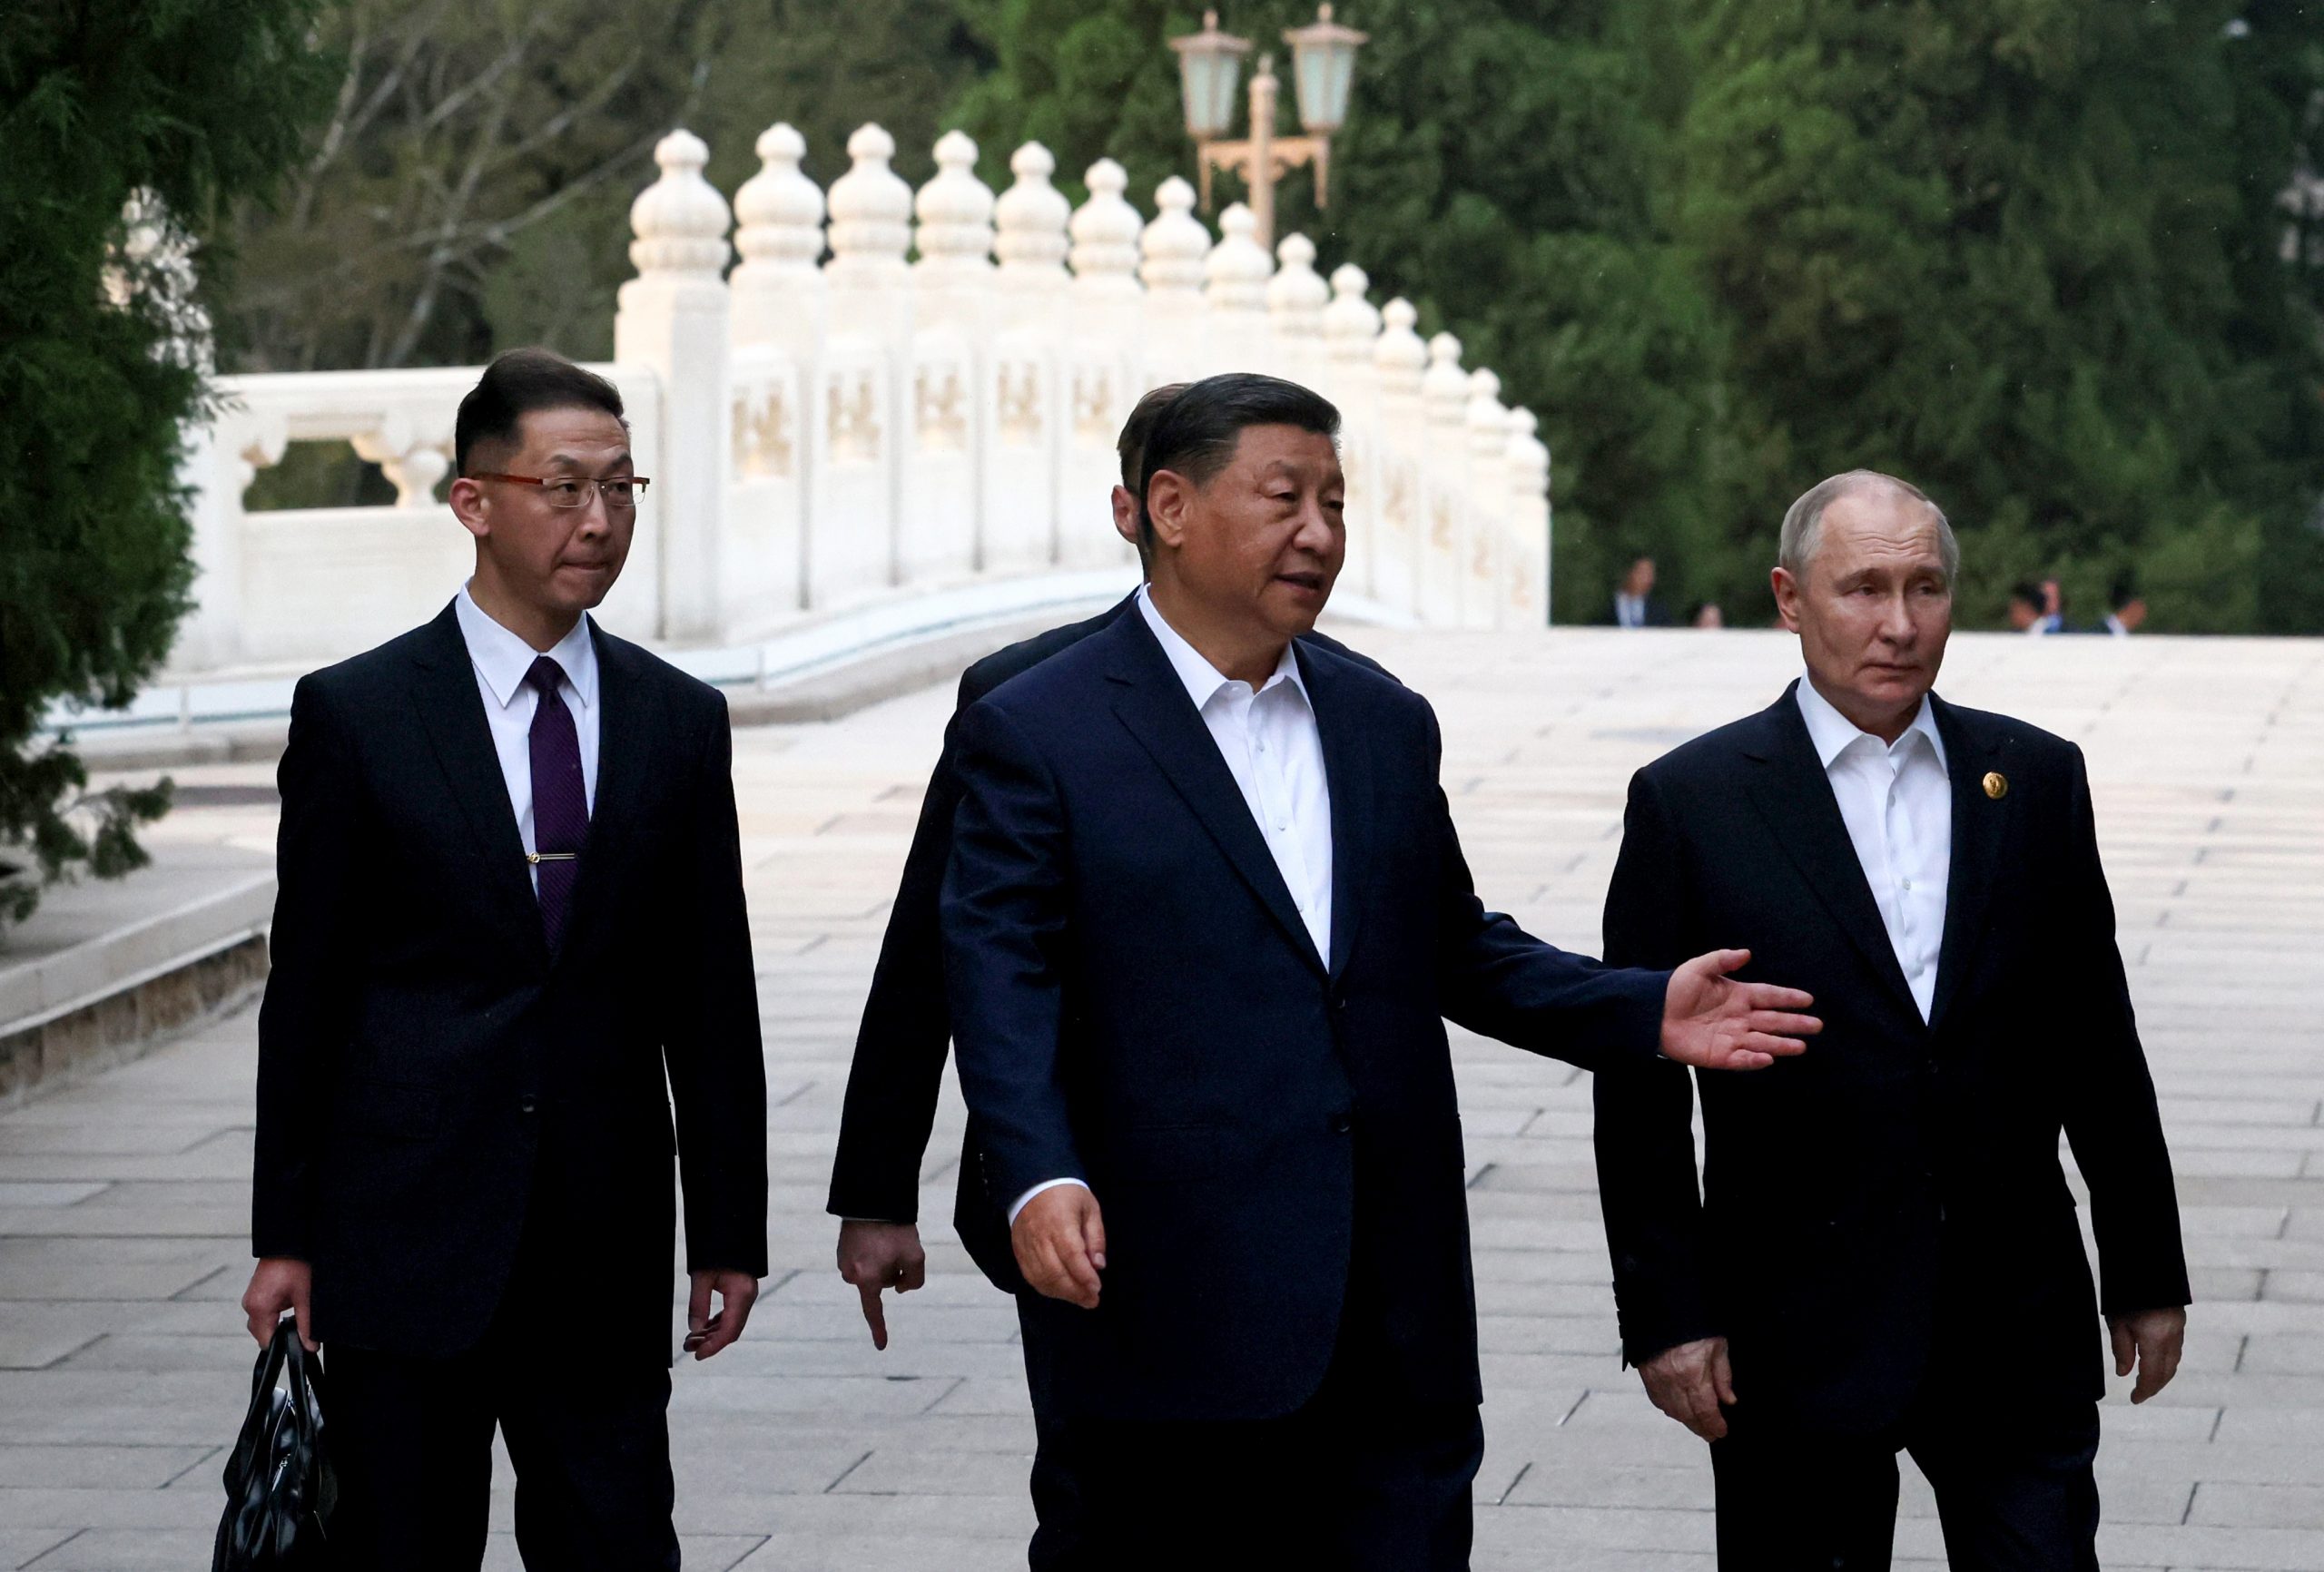 Bizarre moment Xi and Putin go in for TWO HUGS in unprecedented touchy-feely embrace during despots’ love-in talks